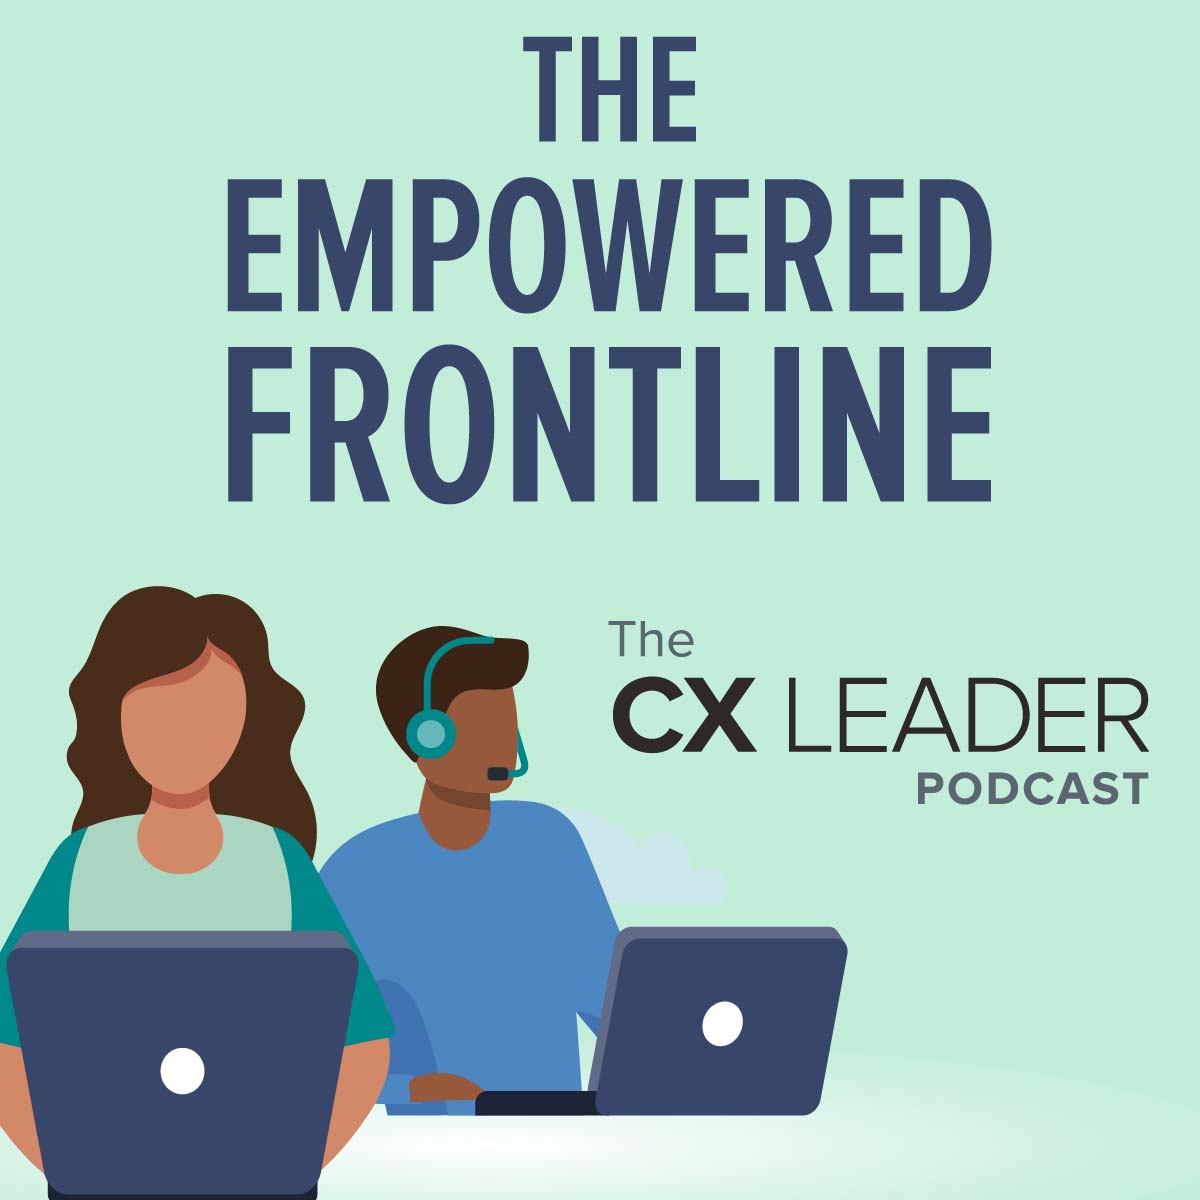 The Empowered Frontline